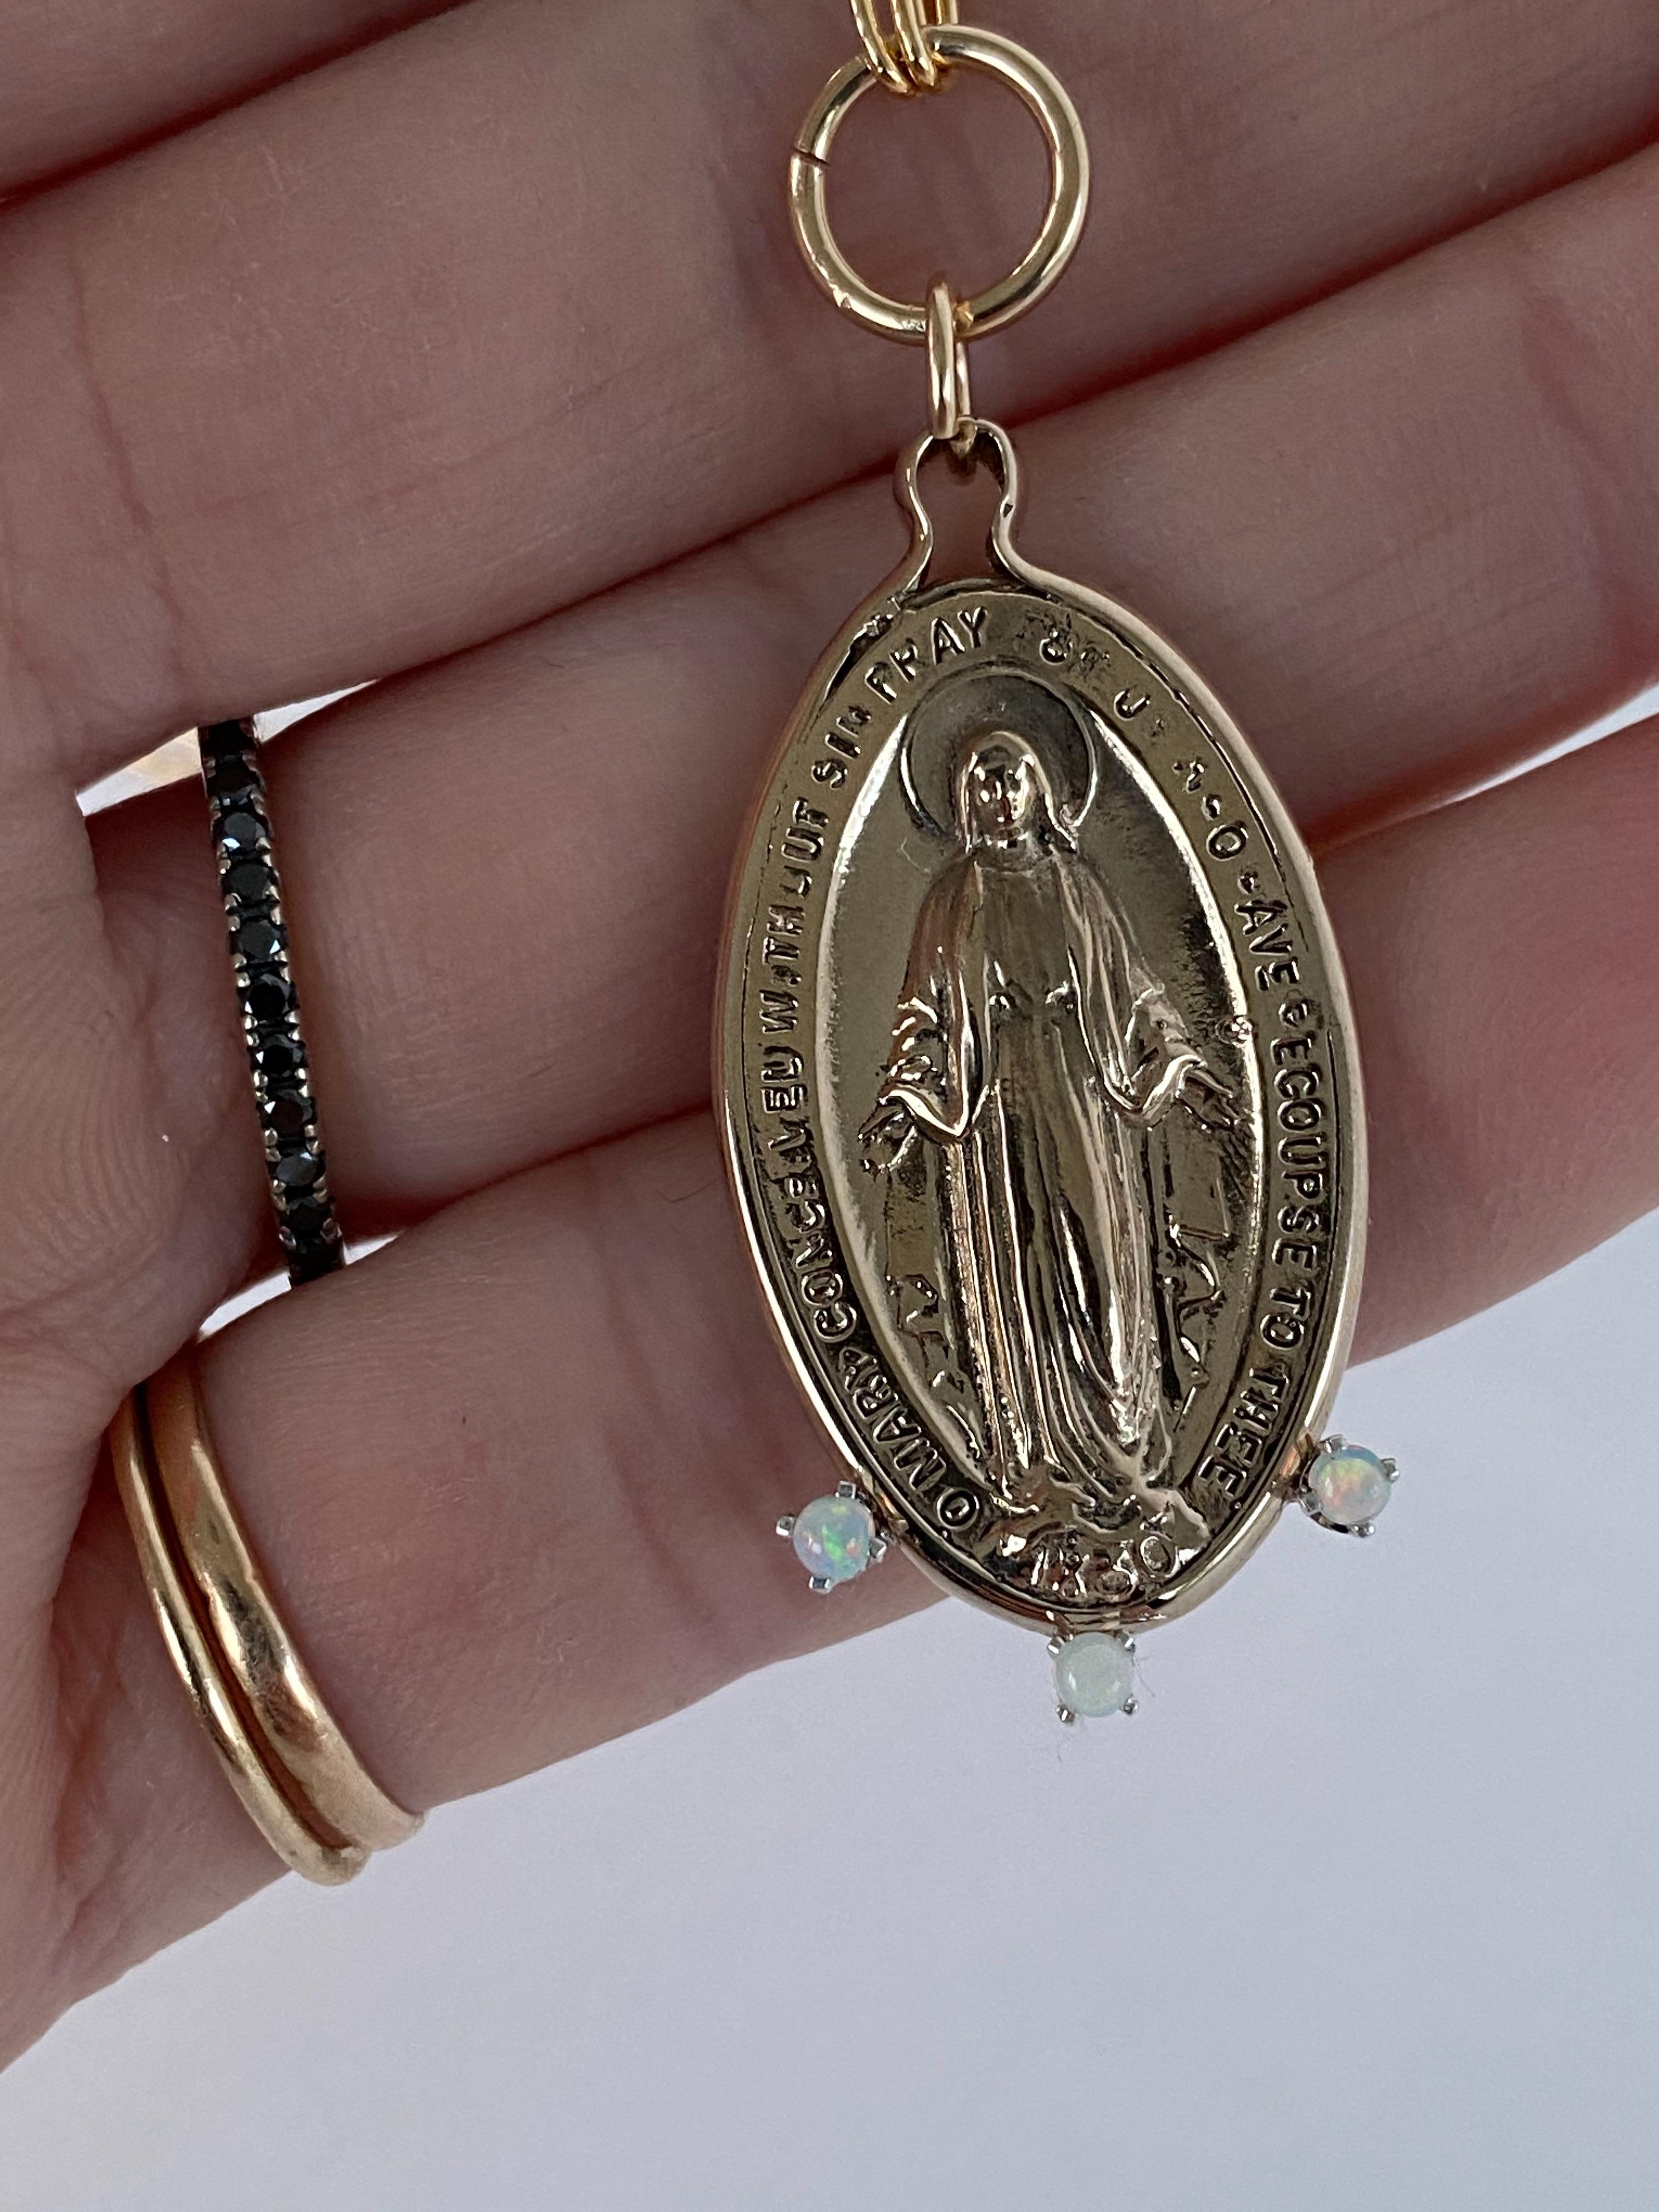 Chain Necklace Medal Virgin Mary Miraculous Opals Oval Pendant Bronze J Dauphin

Exclusive piece with Virgin Mary Miraculous Medal pendant with 3 Opals. The Chain is 24' long but can be made shorter or longer on request.

This item is called